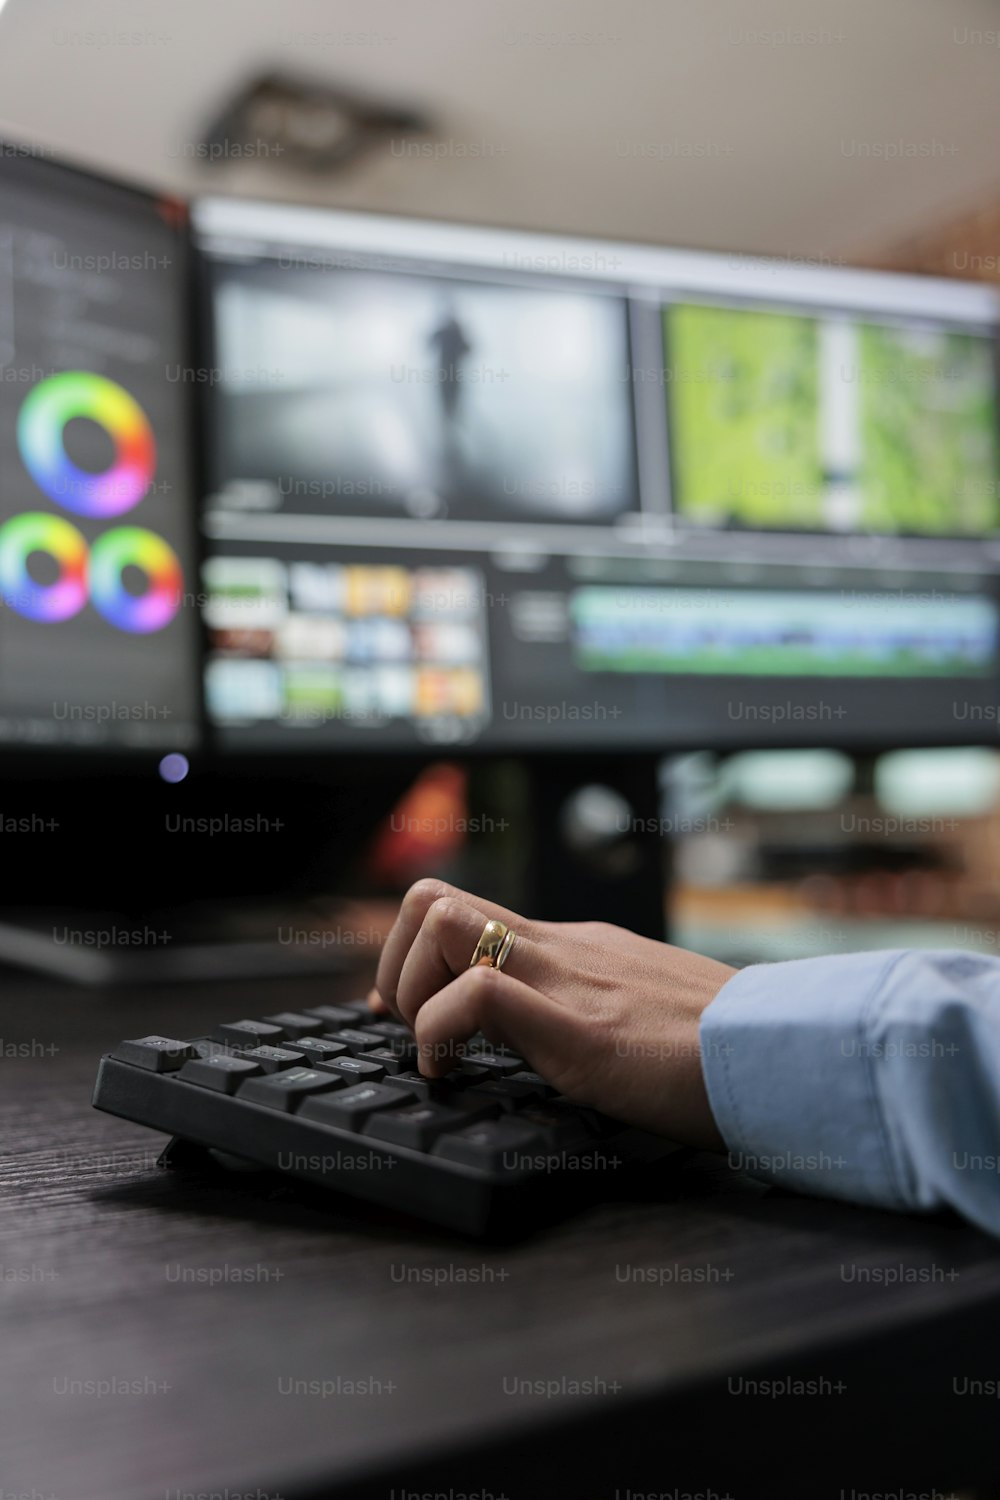 Close up shot of video graphic editor using specialized software to edit movie footage and improve visual quality. Professional videographer sitting at multi monitor workstation enhancing film frames.